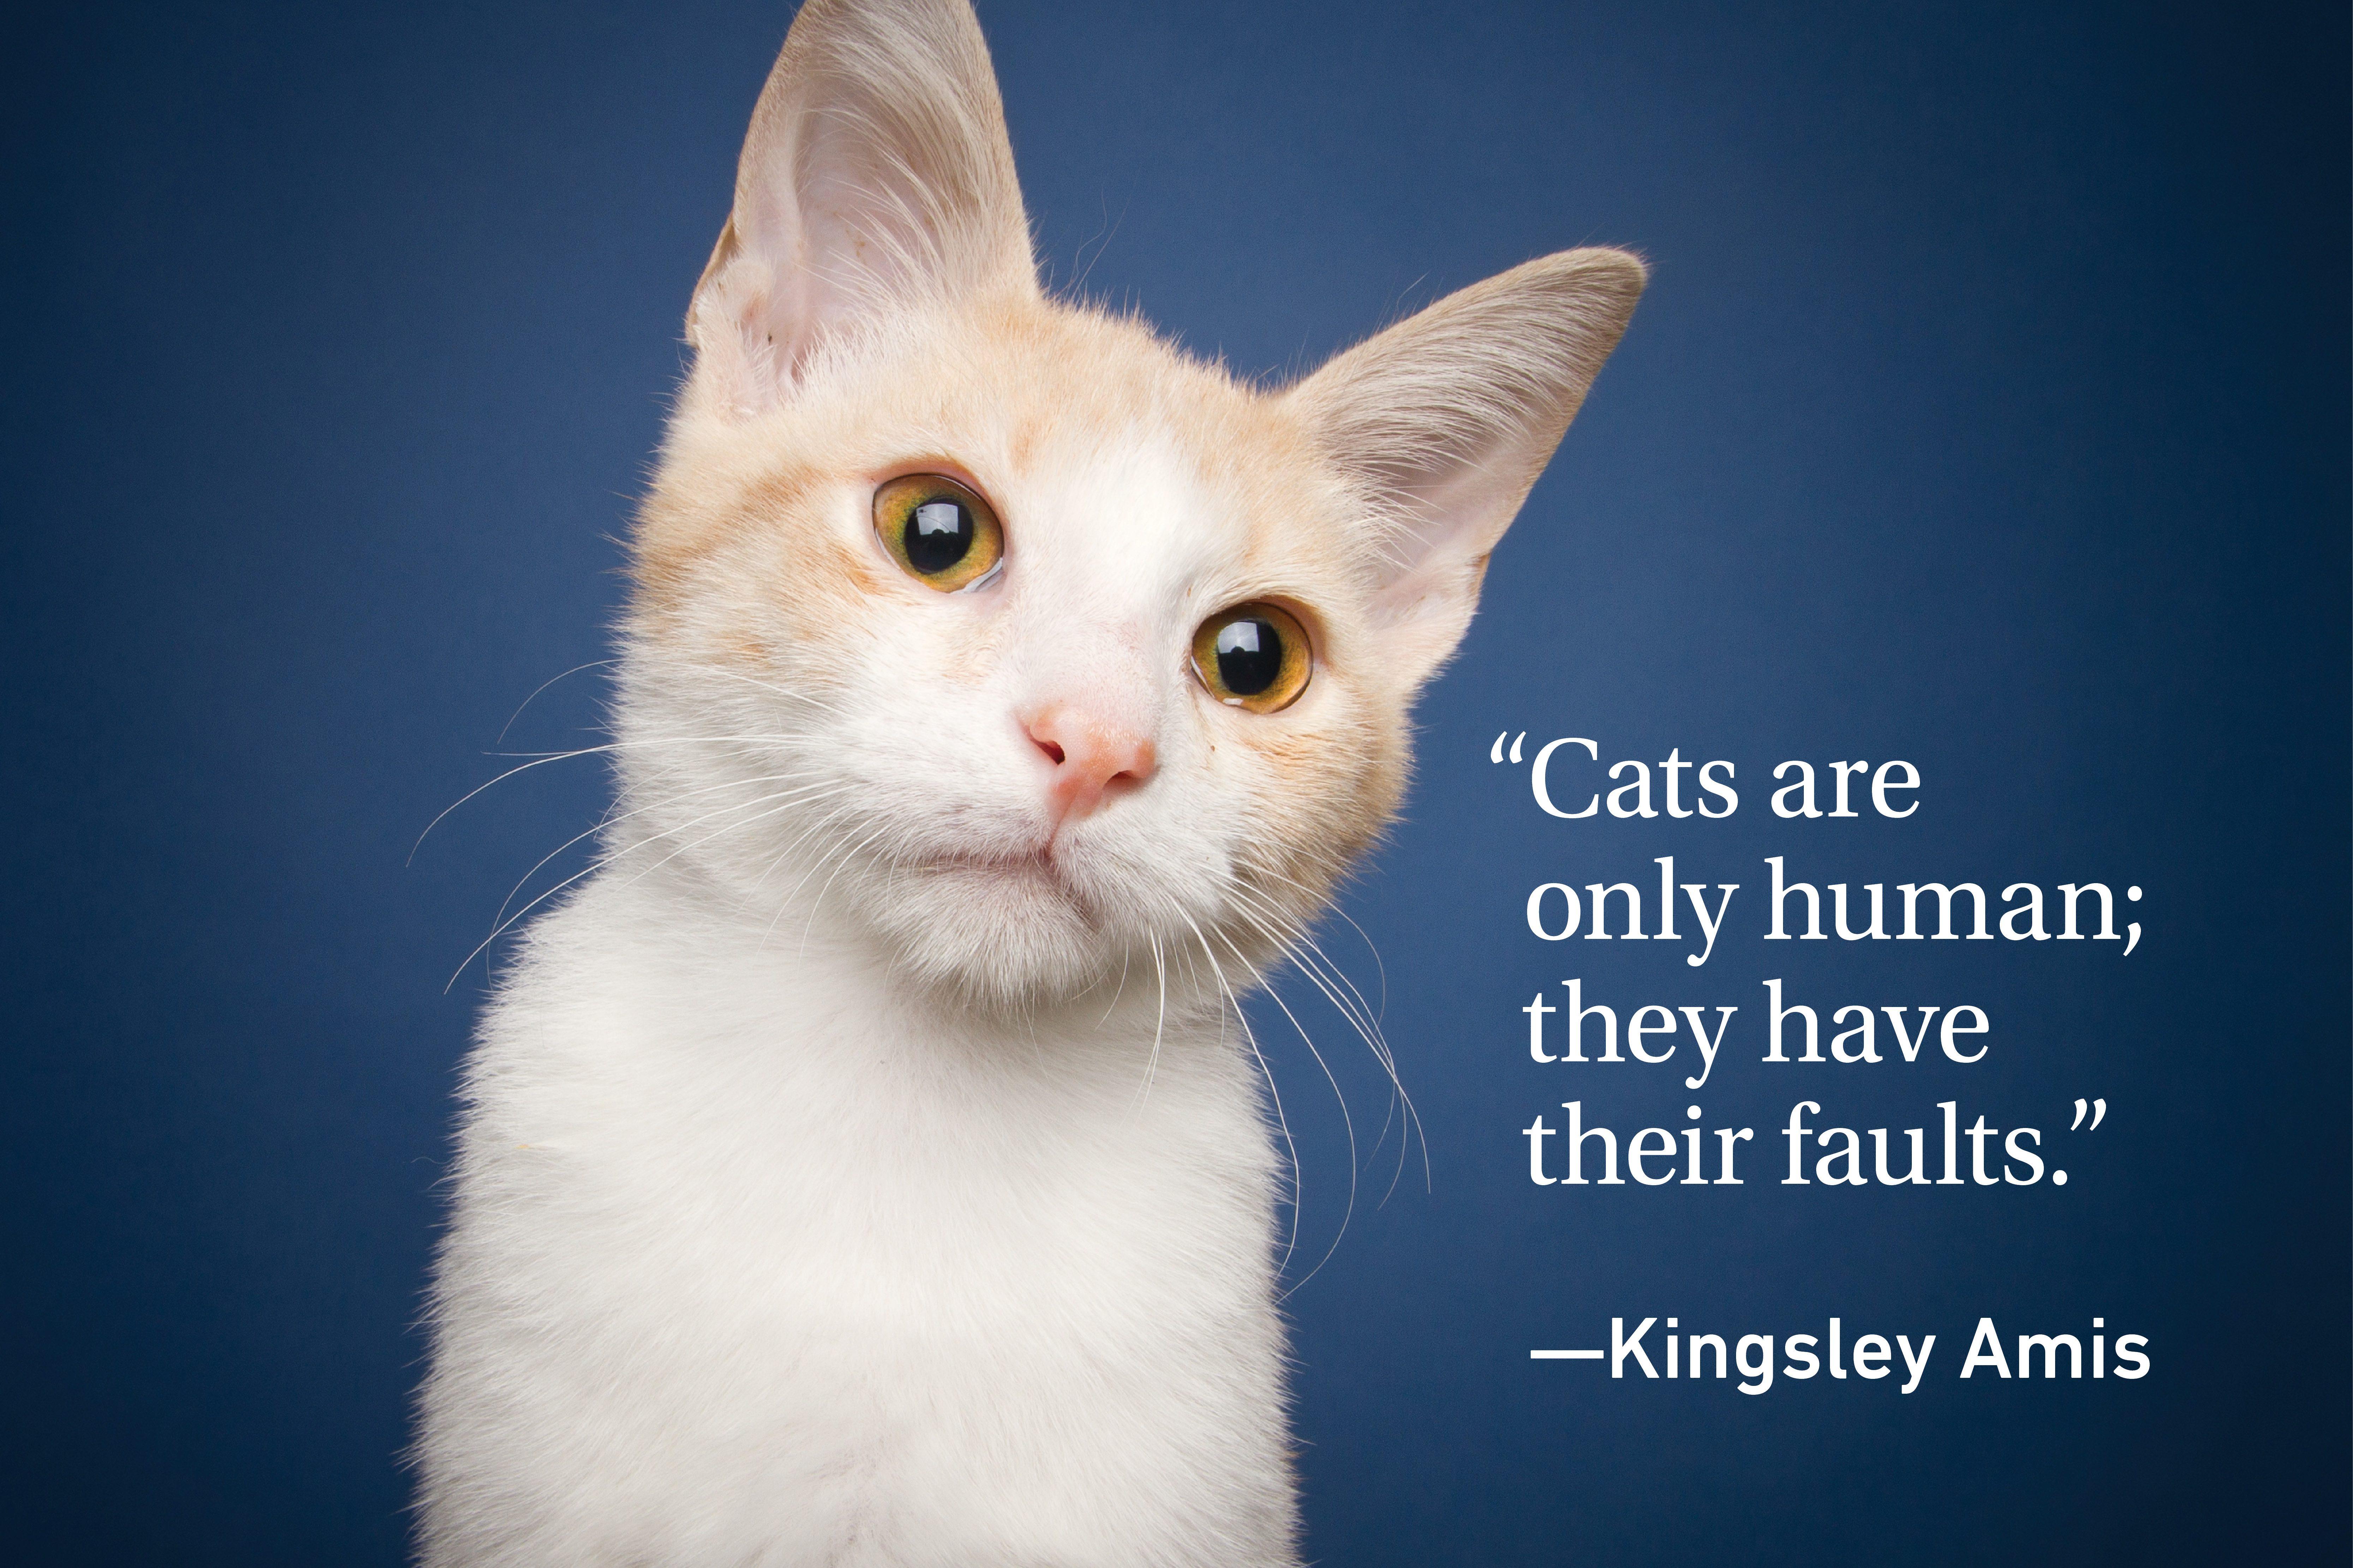 Cat on blue background with a quote